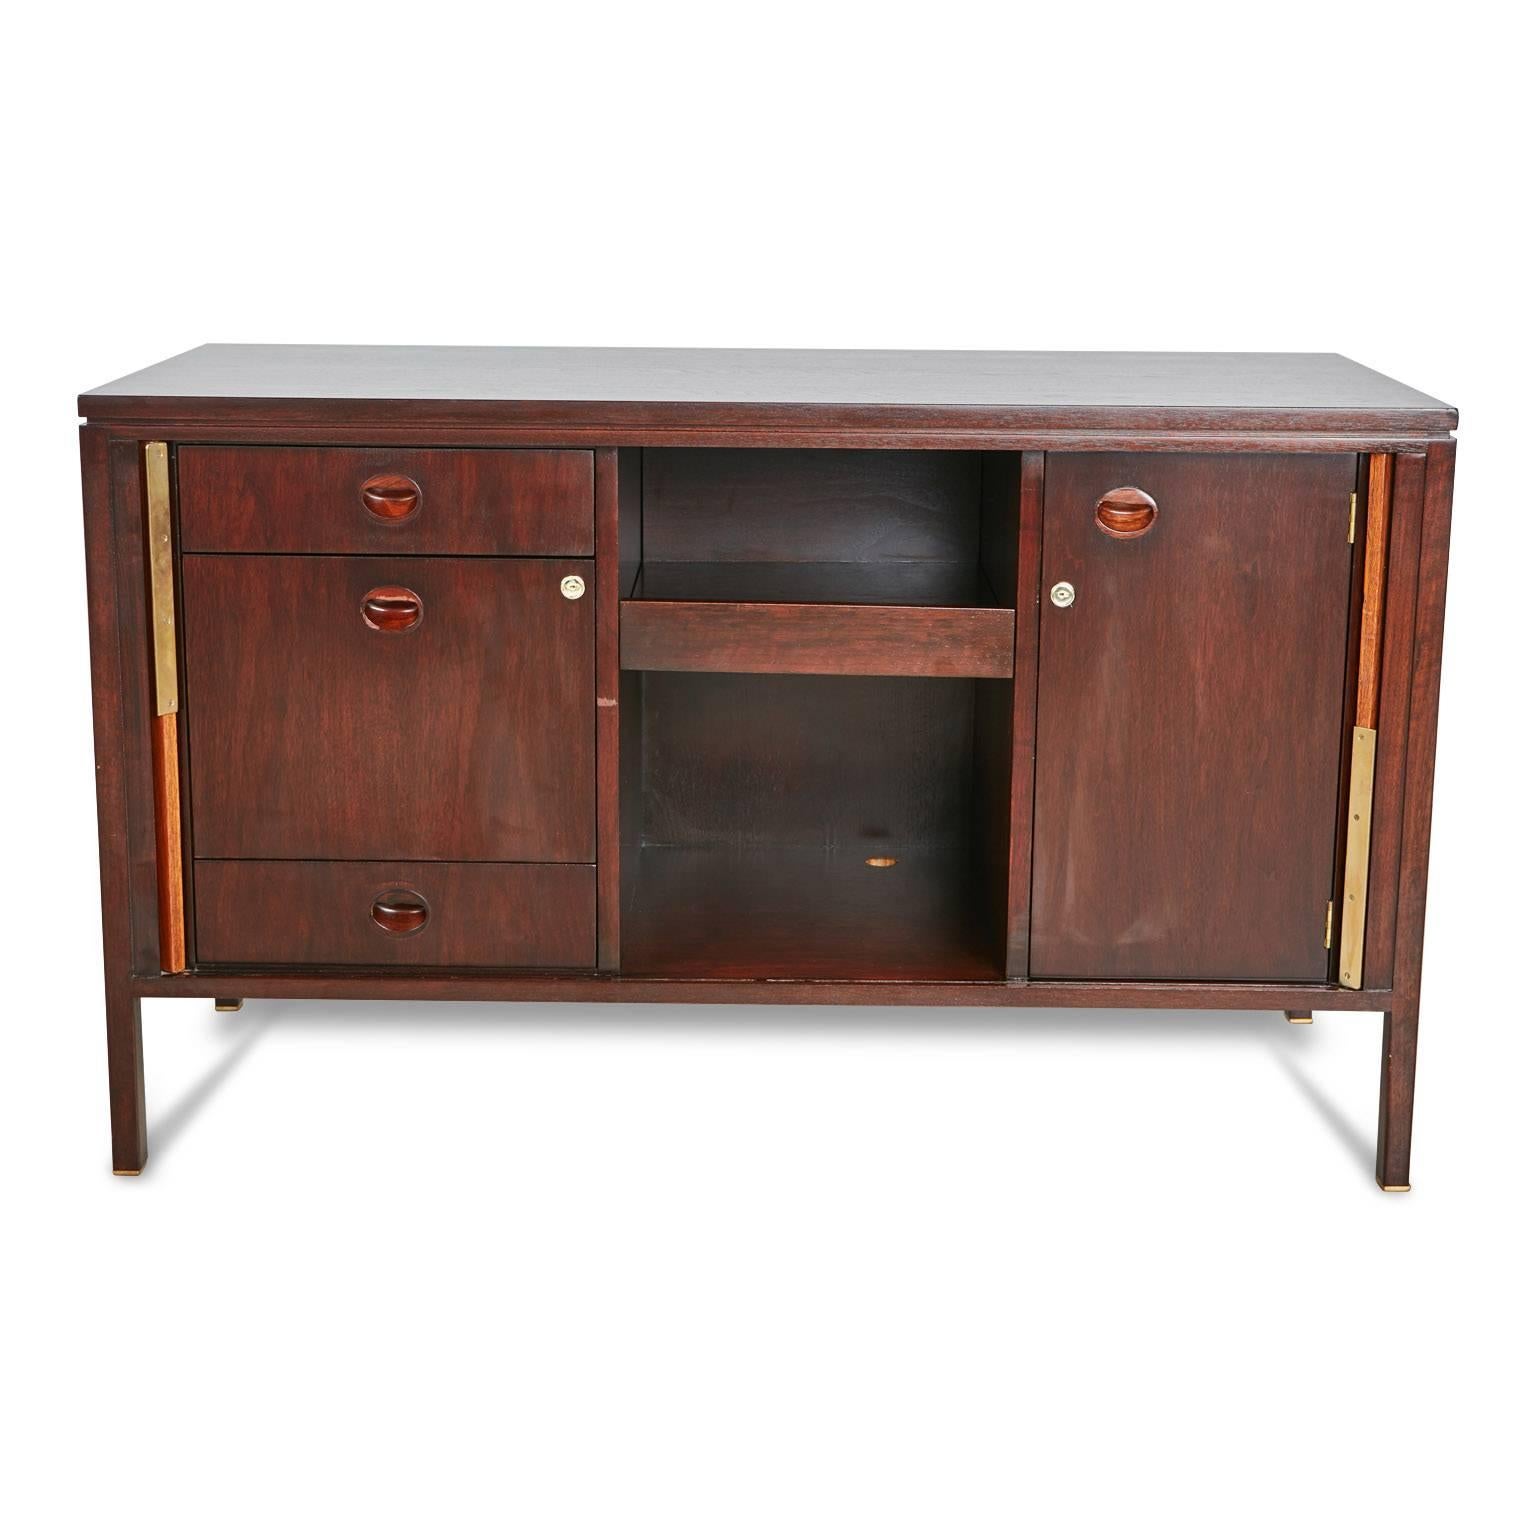 Mid-20th Century Edward Wormley for Dunbar Tambour Credenza with Pop-Up Table, circa 1960